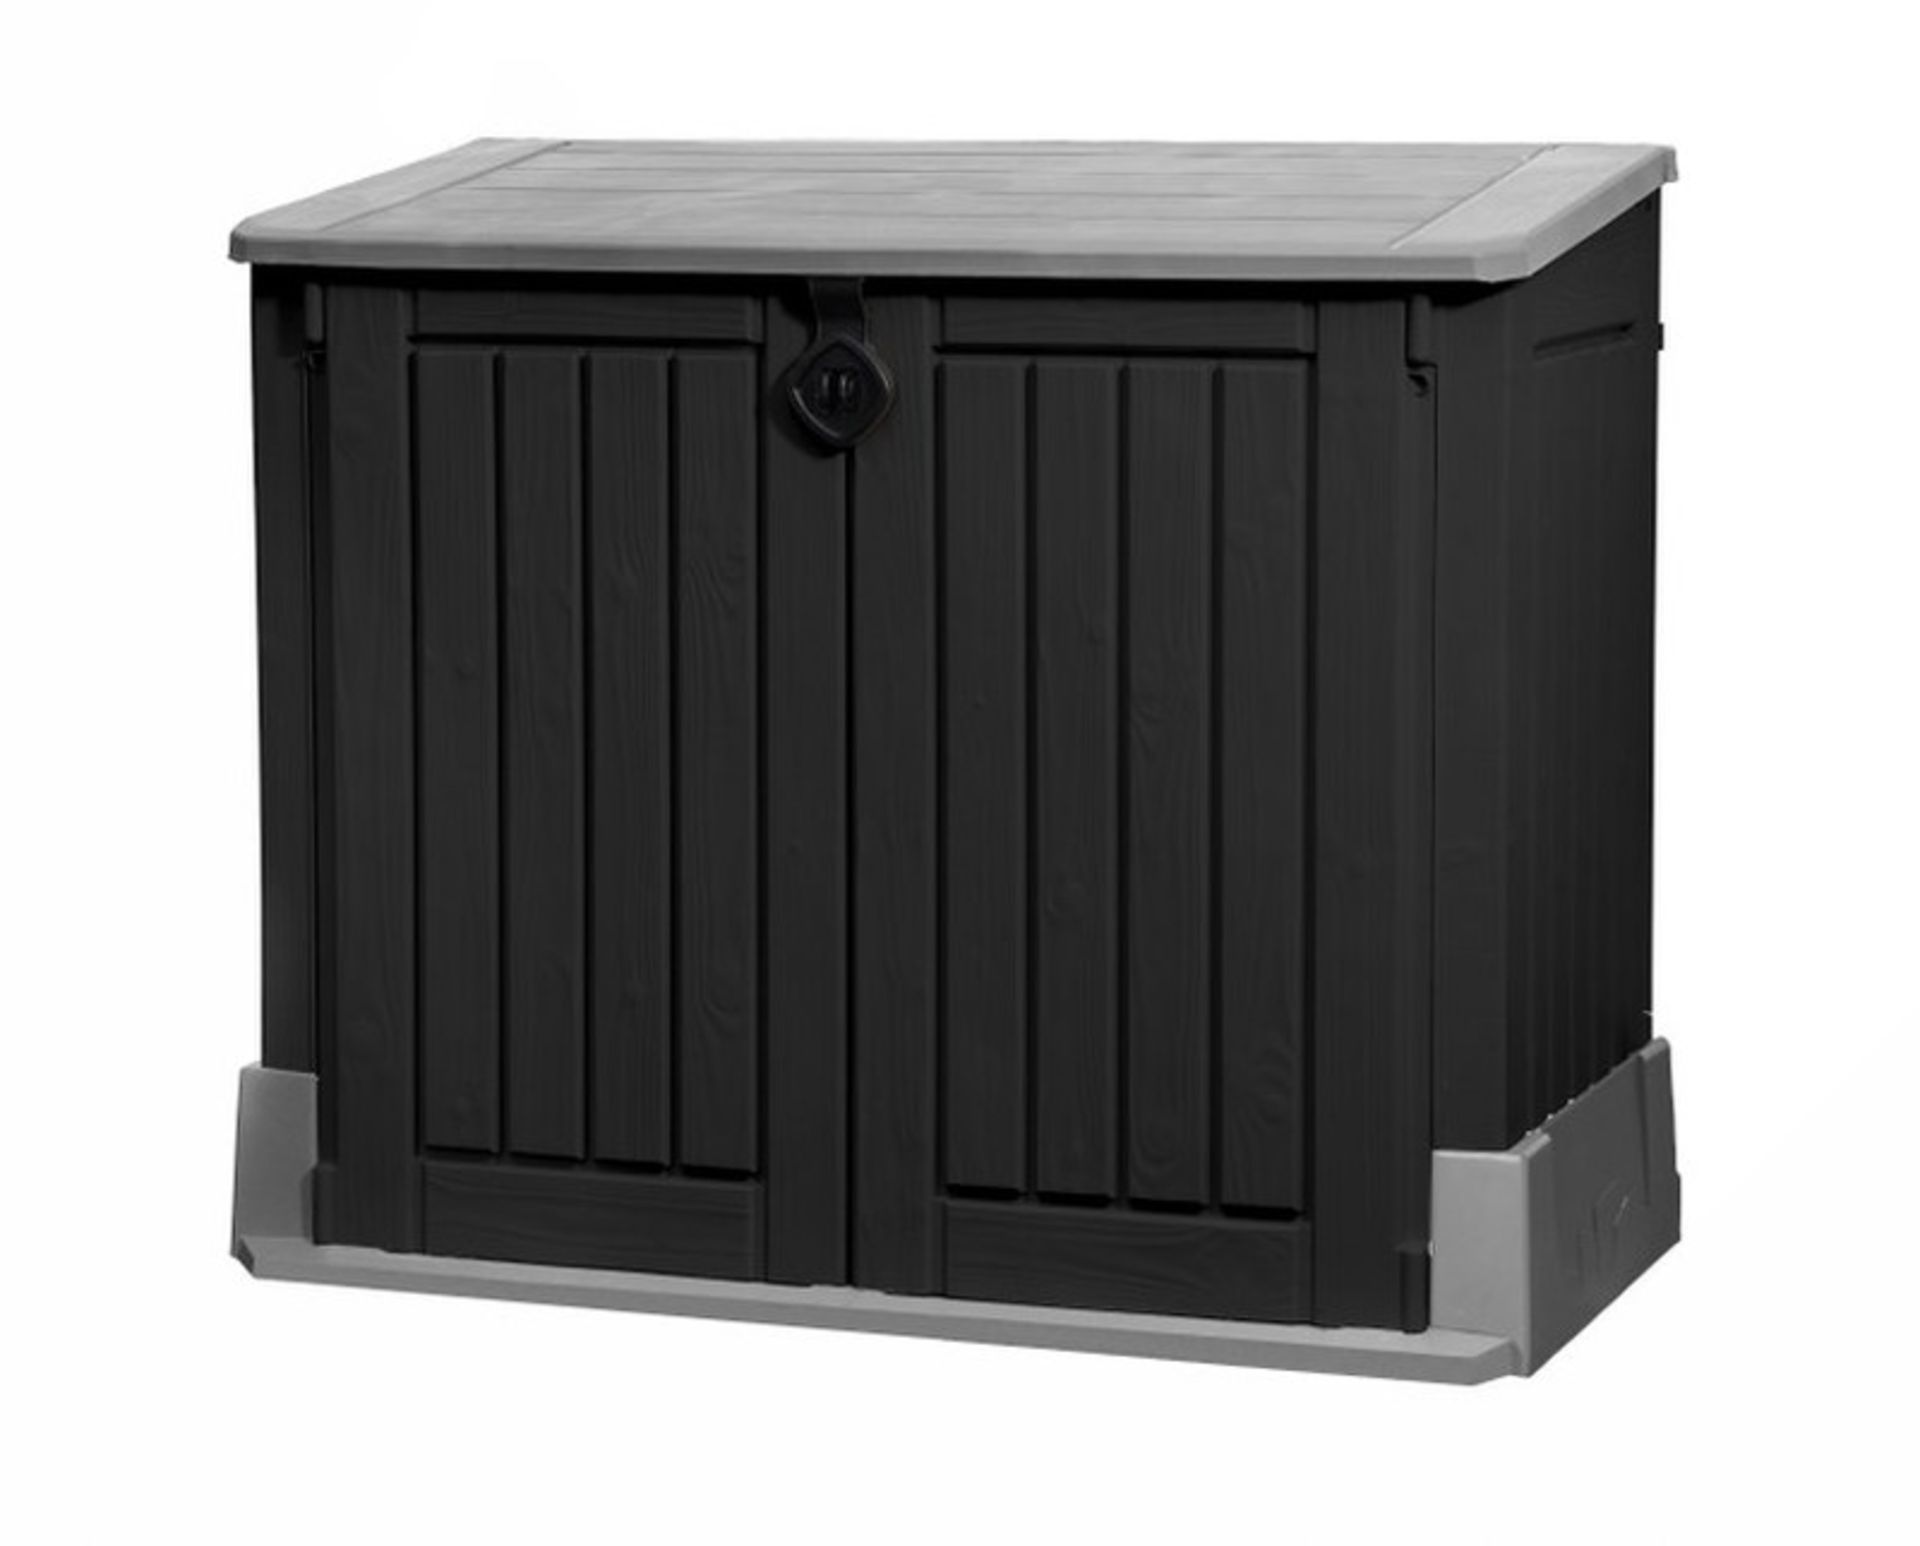 Keter Store It Out Midi Outdoor Plastic Garden Storage Shed RRP £145